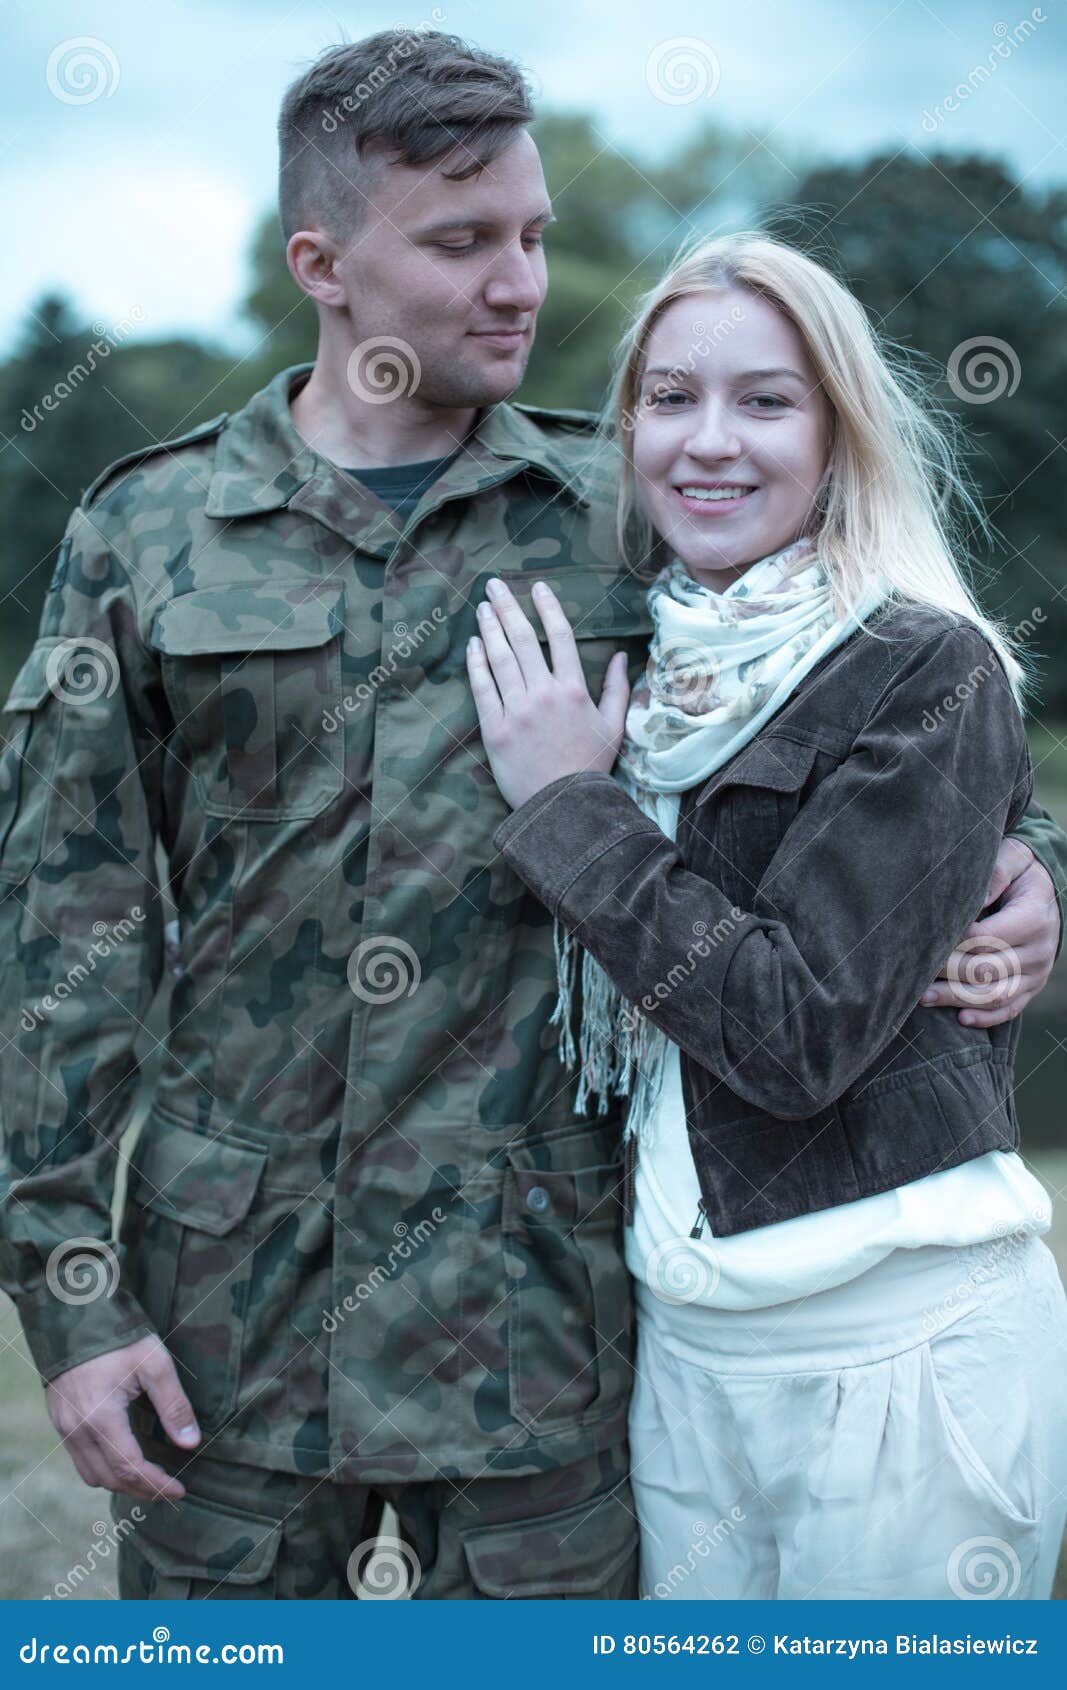 wifey welcoming home young soldier Sex Pics Hd